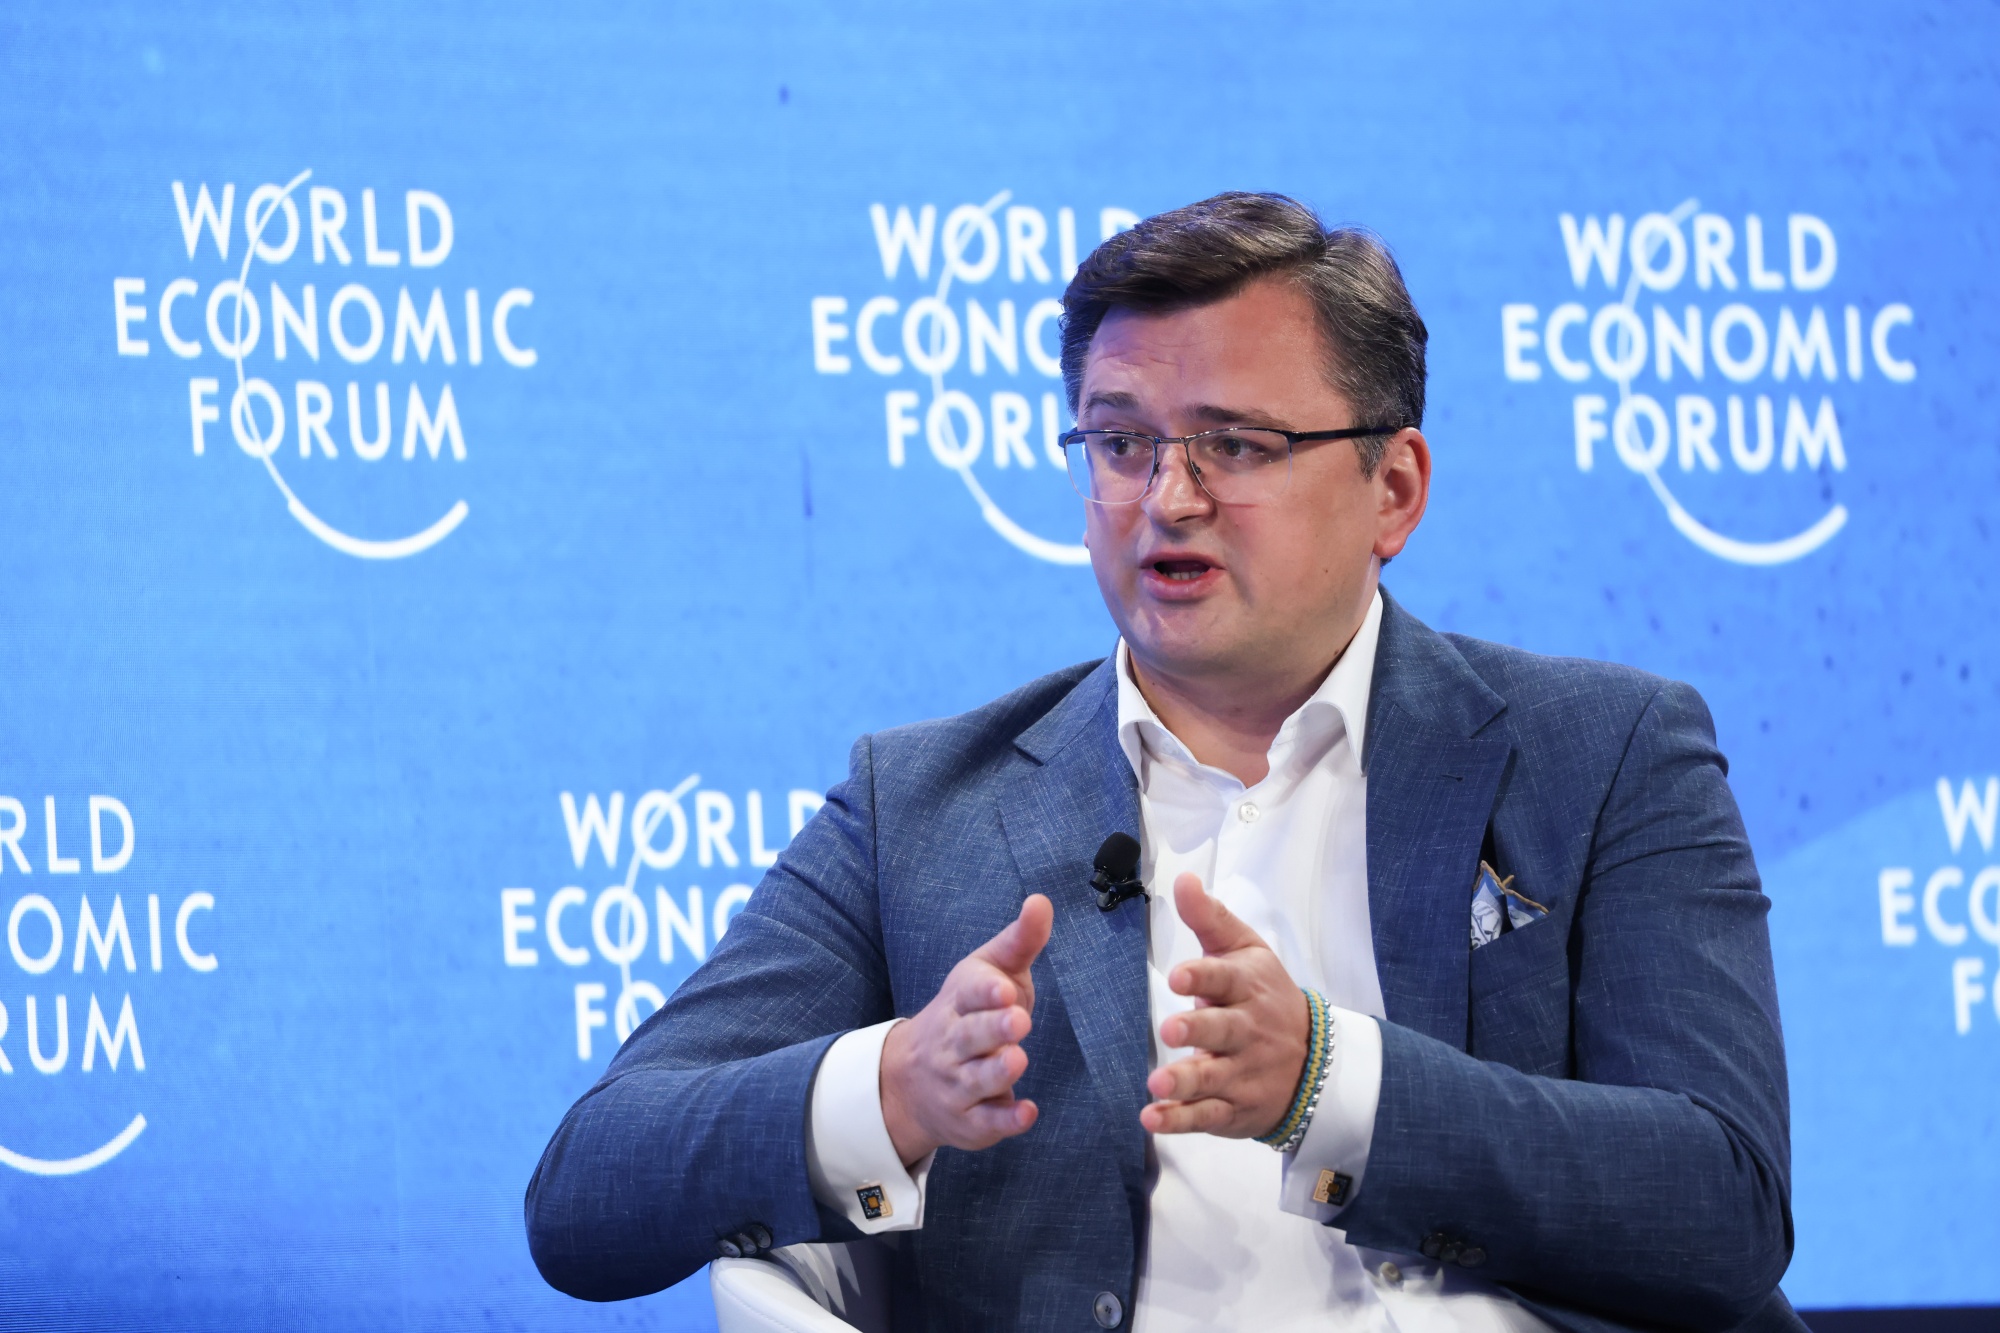 Dmytro Kuleba, Ukraine's foreign minister, speaks during a panel session on day three of the World Economic Forum (WEF) in Davos, Switzerland, on Wednesday, May 25, 2022. The annual Davos gathering of political leaders, top executives and celebrities runs from May 22 to 26.